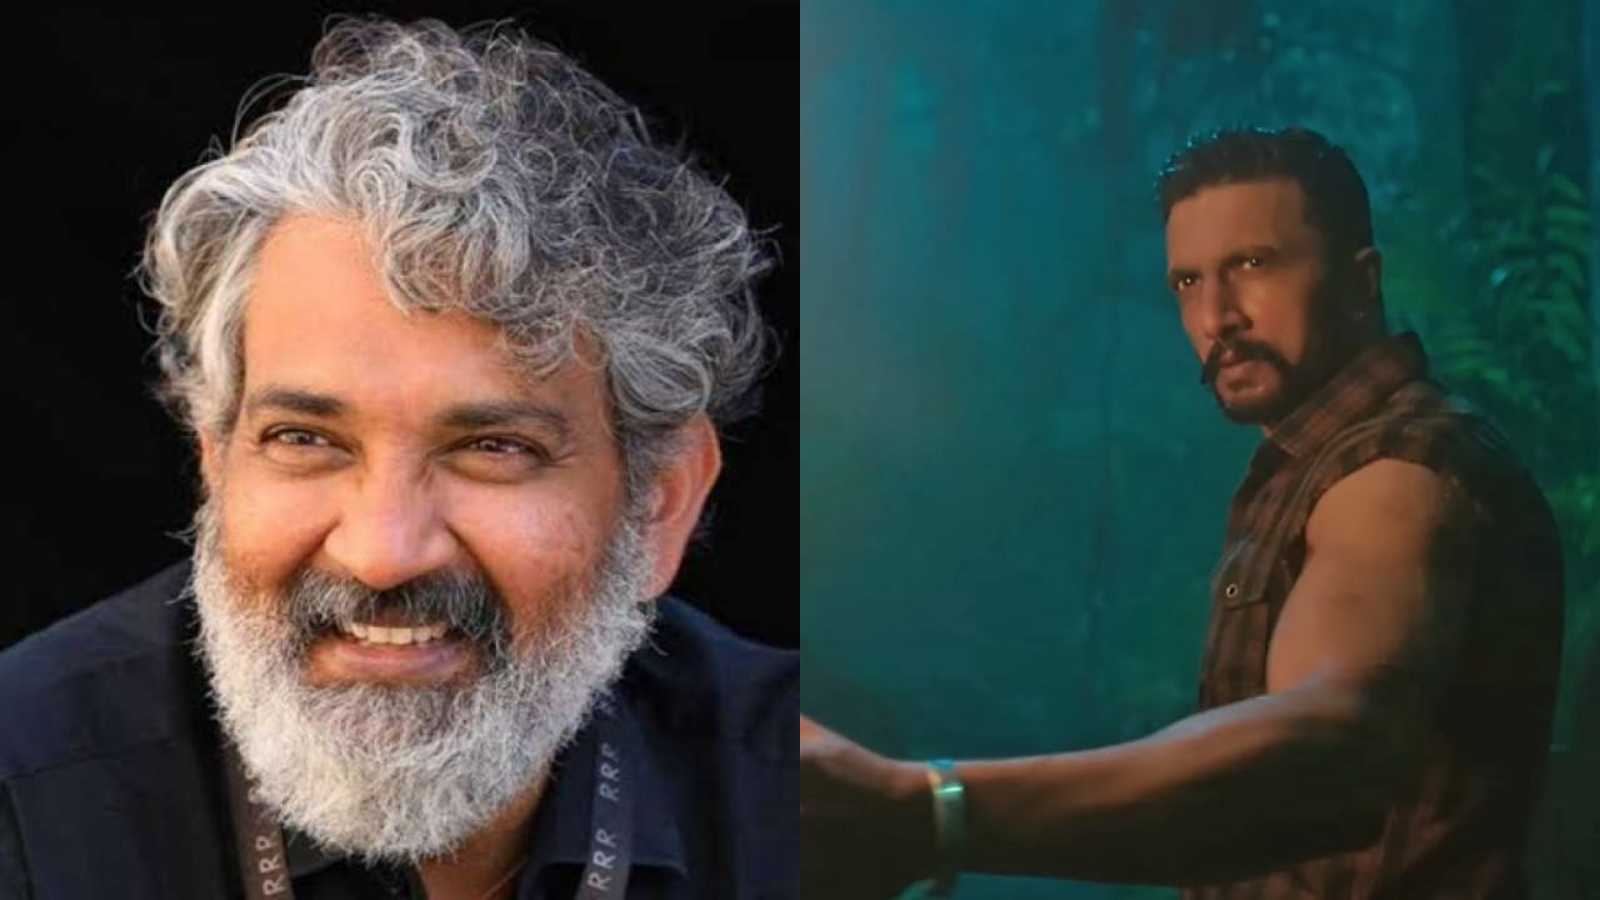 S.S. Rajamouli applauds Vikrant Rona star Kichcha Sudeep's guts for taking a risk with the project and succeeding; read appreciation post